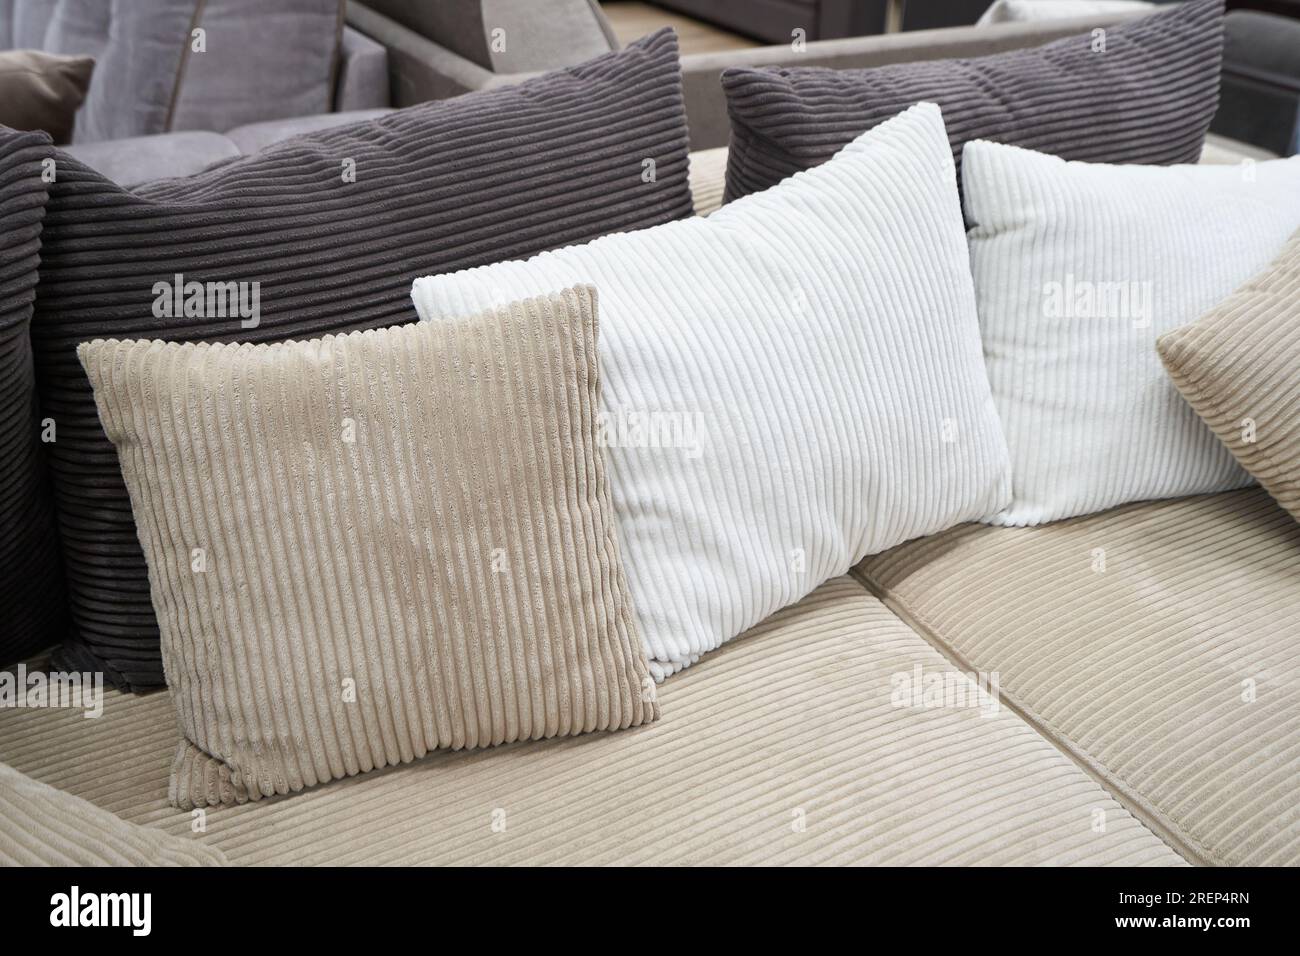 Soft pillows and a sofa made of corduroy fabric Stock Photo